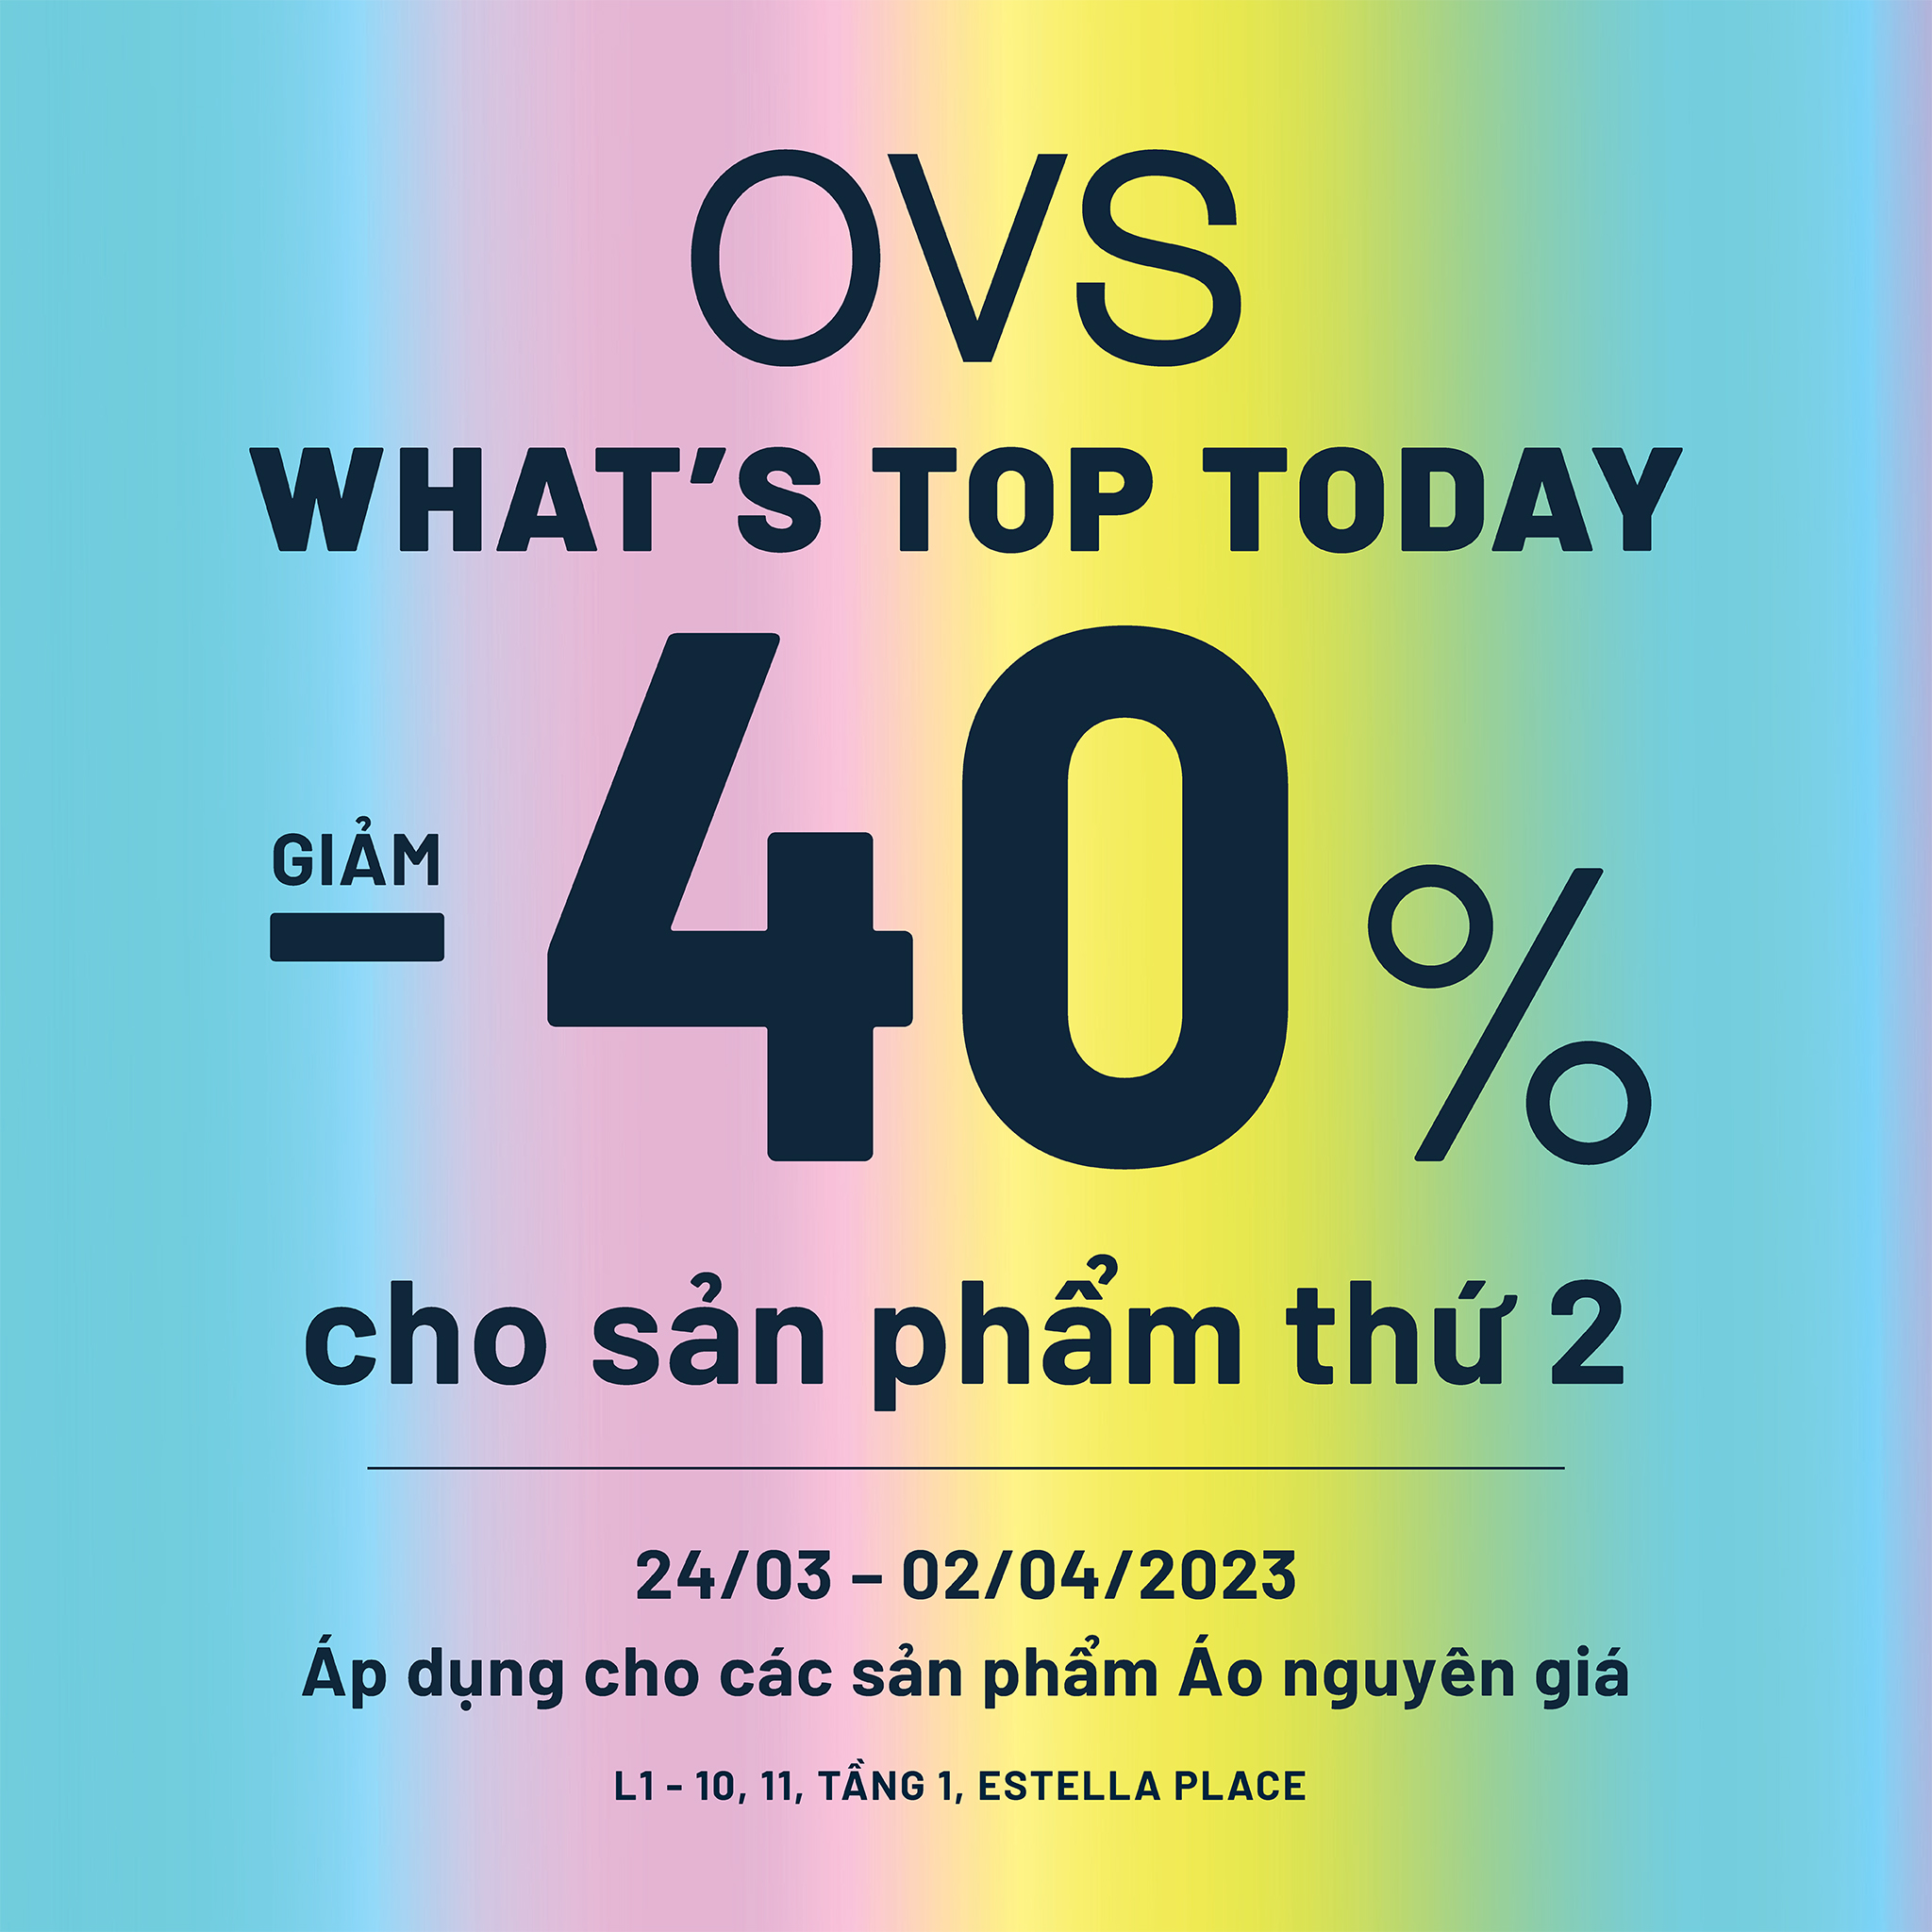 OVS – WHAT'S TOP TODAY?